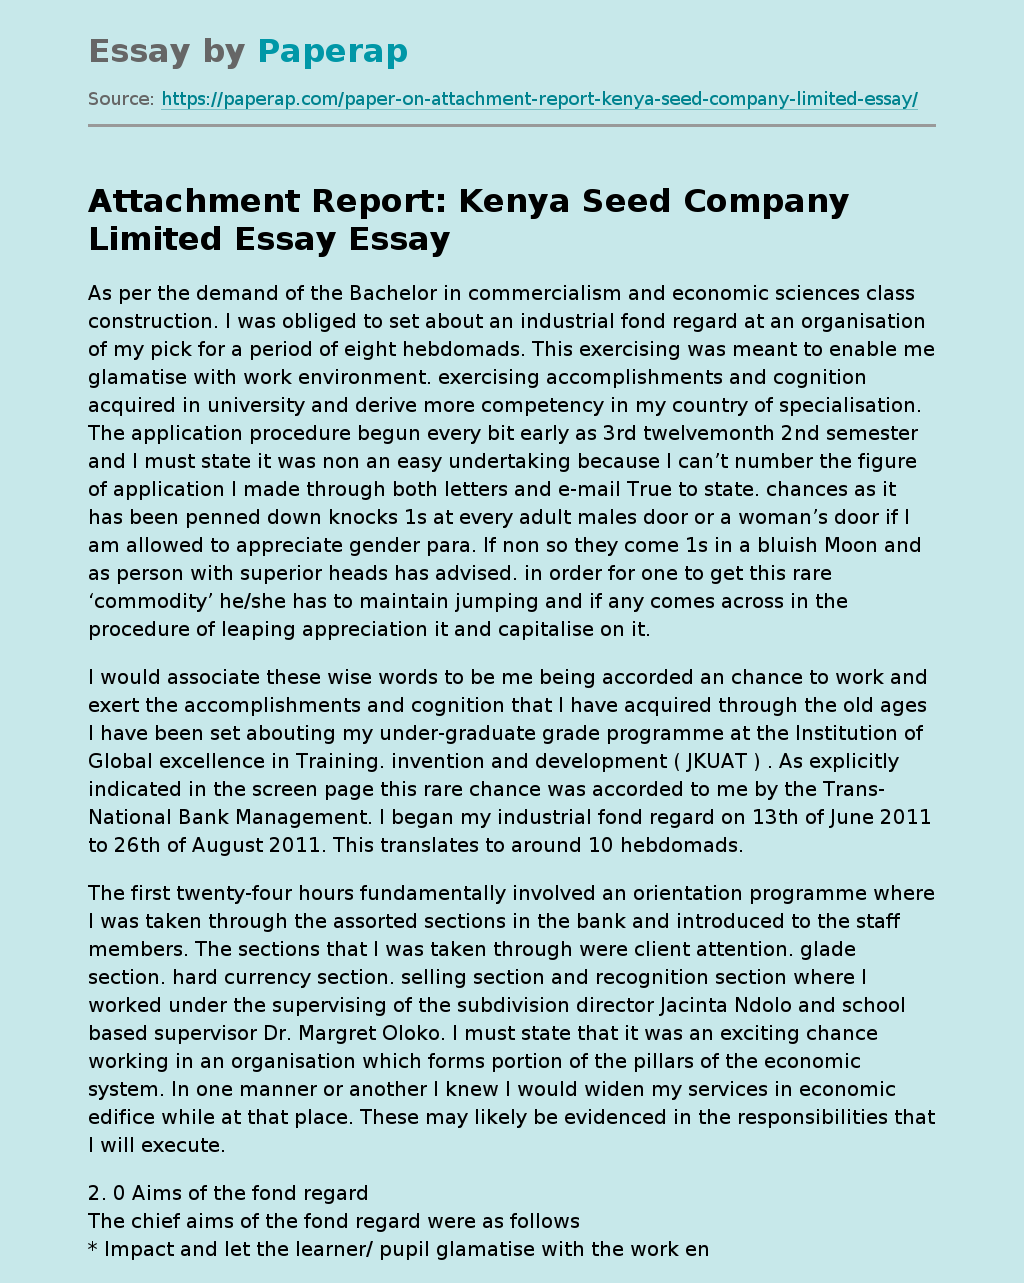 Attachment Report: Kenya Seed Company Limited Essay